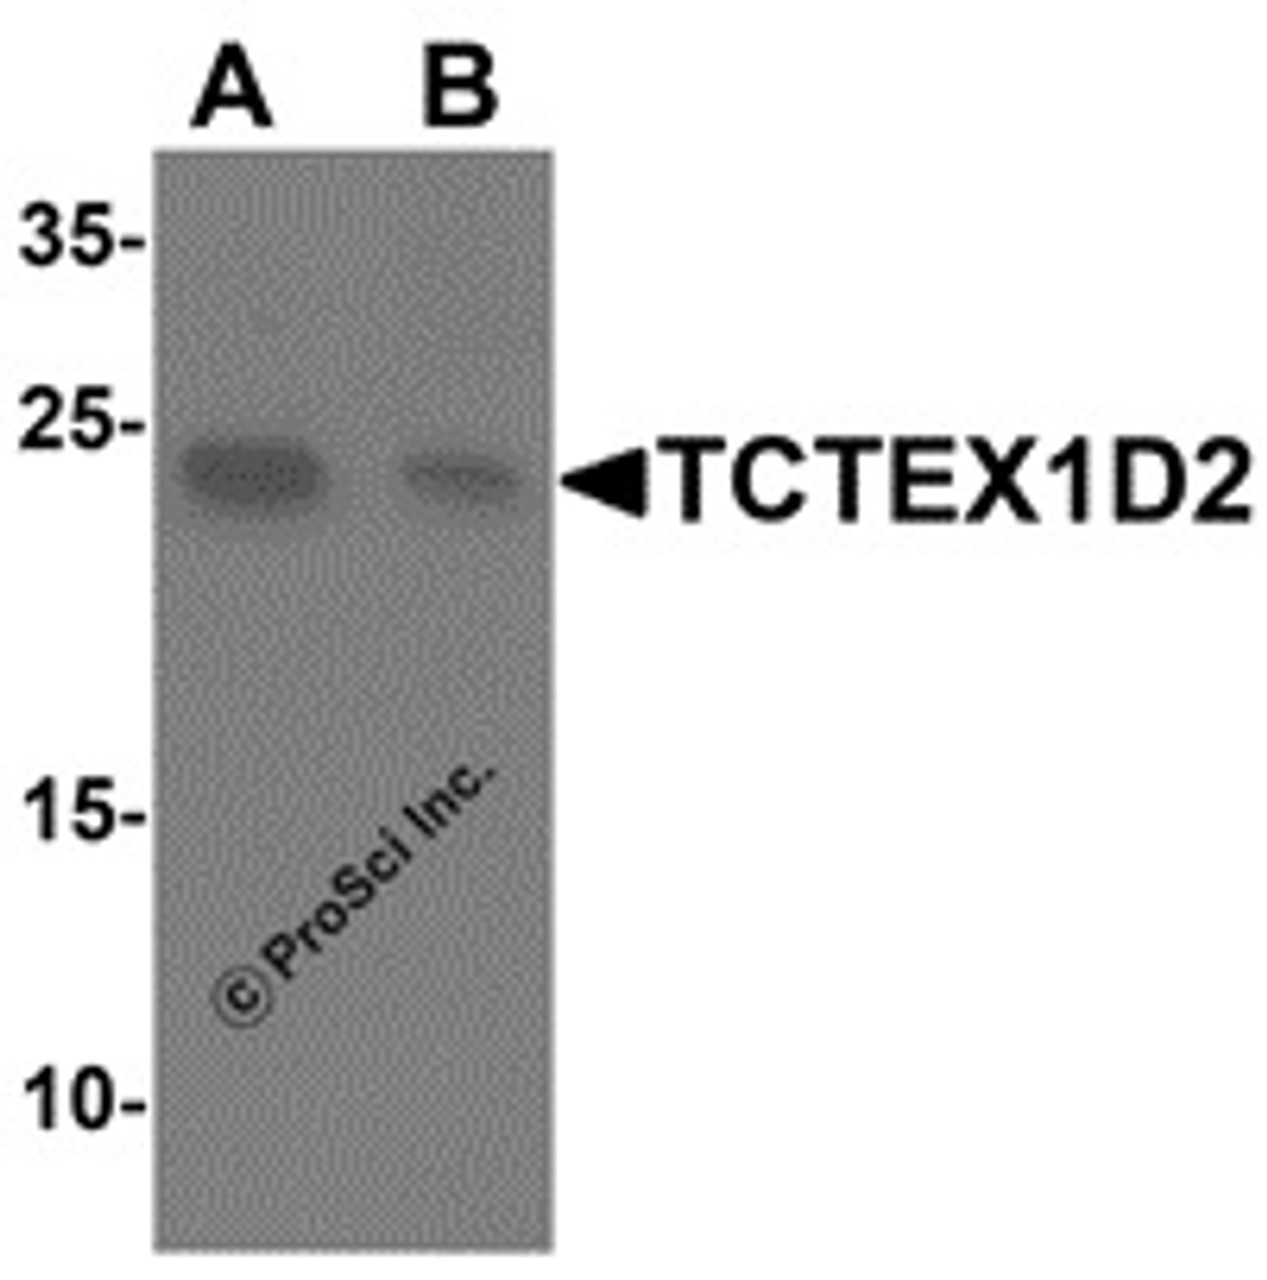 Western blot analysis of TCTEX1D2 in K562 cell lysate with TCTEX1D2 antibody at 1 &#956;g/mL in (A) the absence and (B) the presence of blocking peptide.